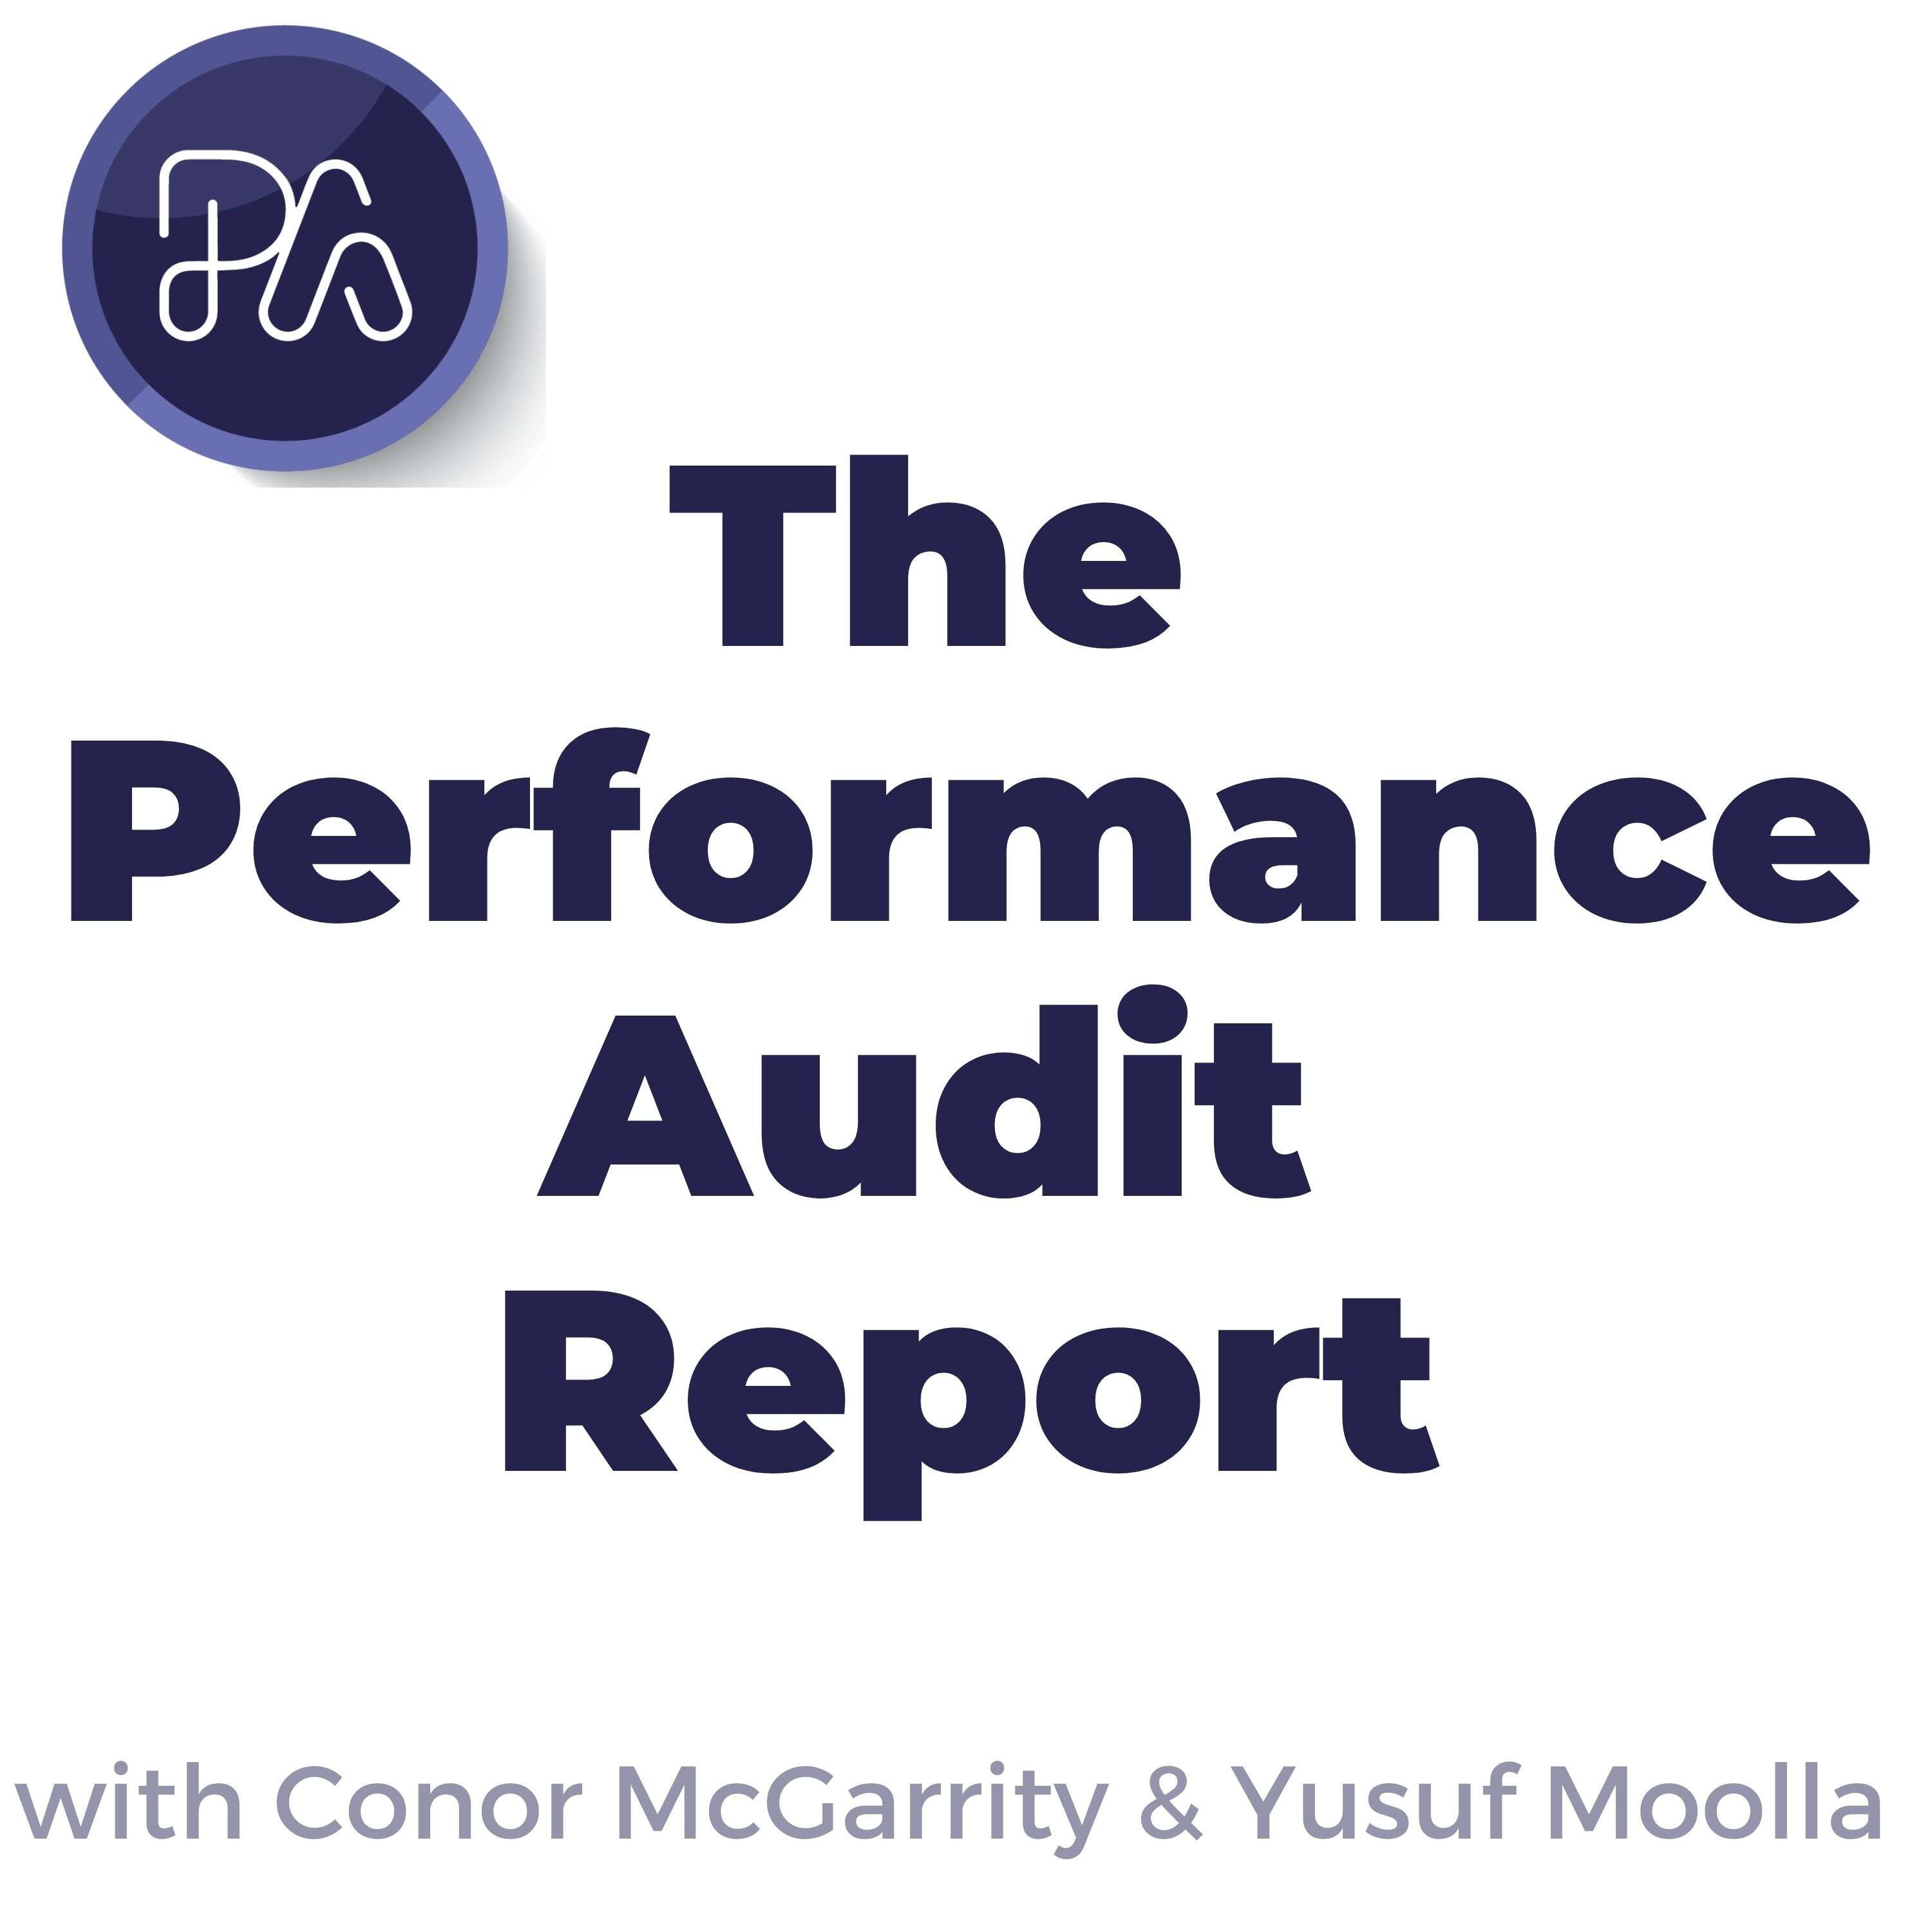 9 | Alternate types of Performance Audit reporting/assurance